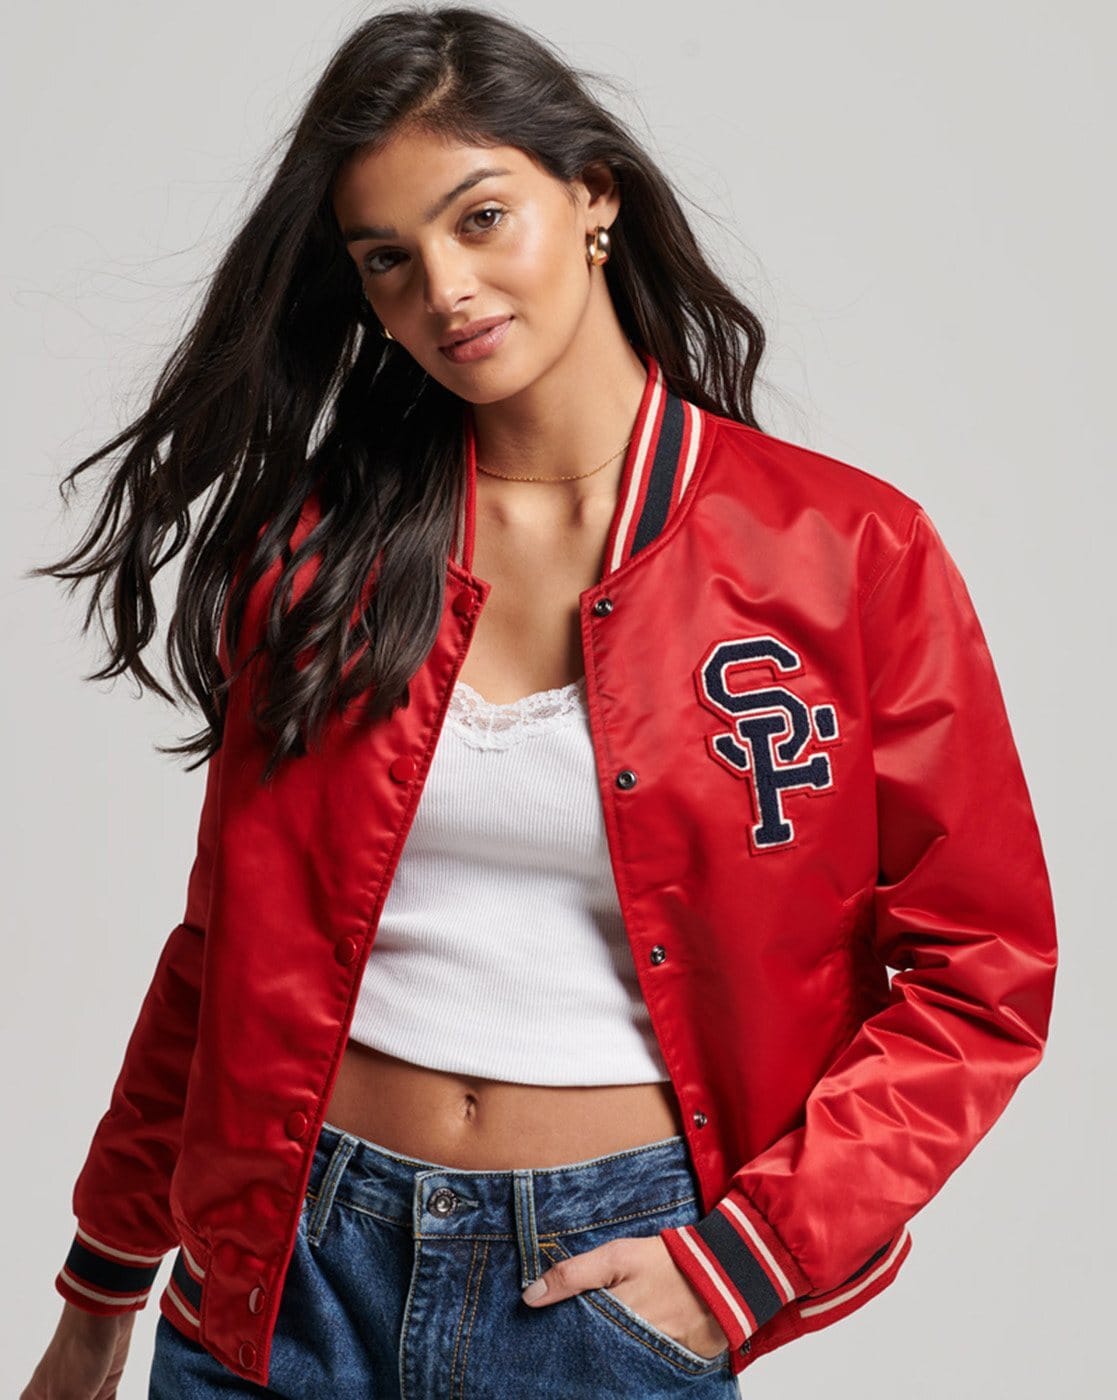 Womens Red and White Varsity Jacket | Letterman Style In Canada-cokhiquangminh.vn